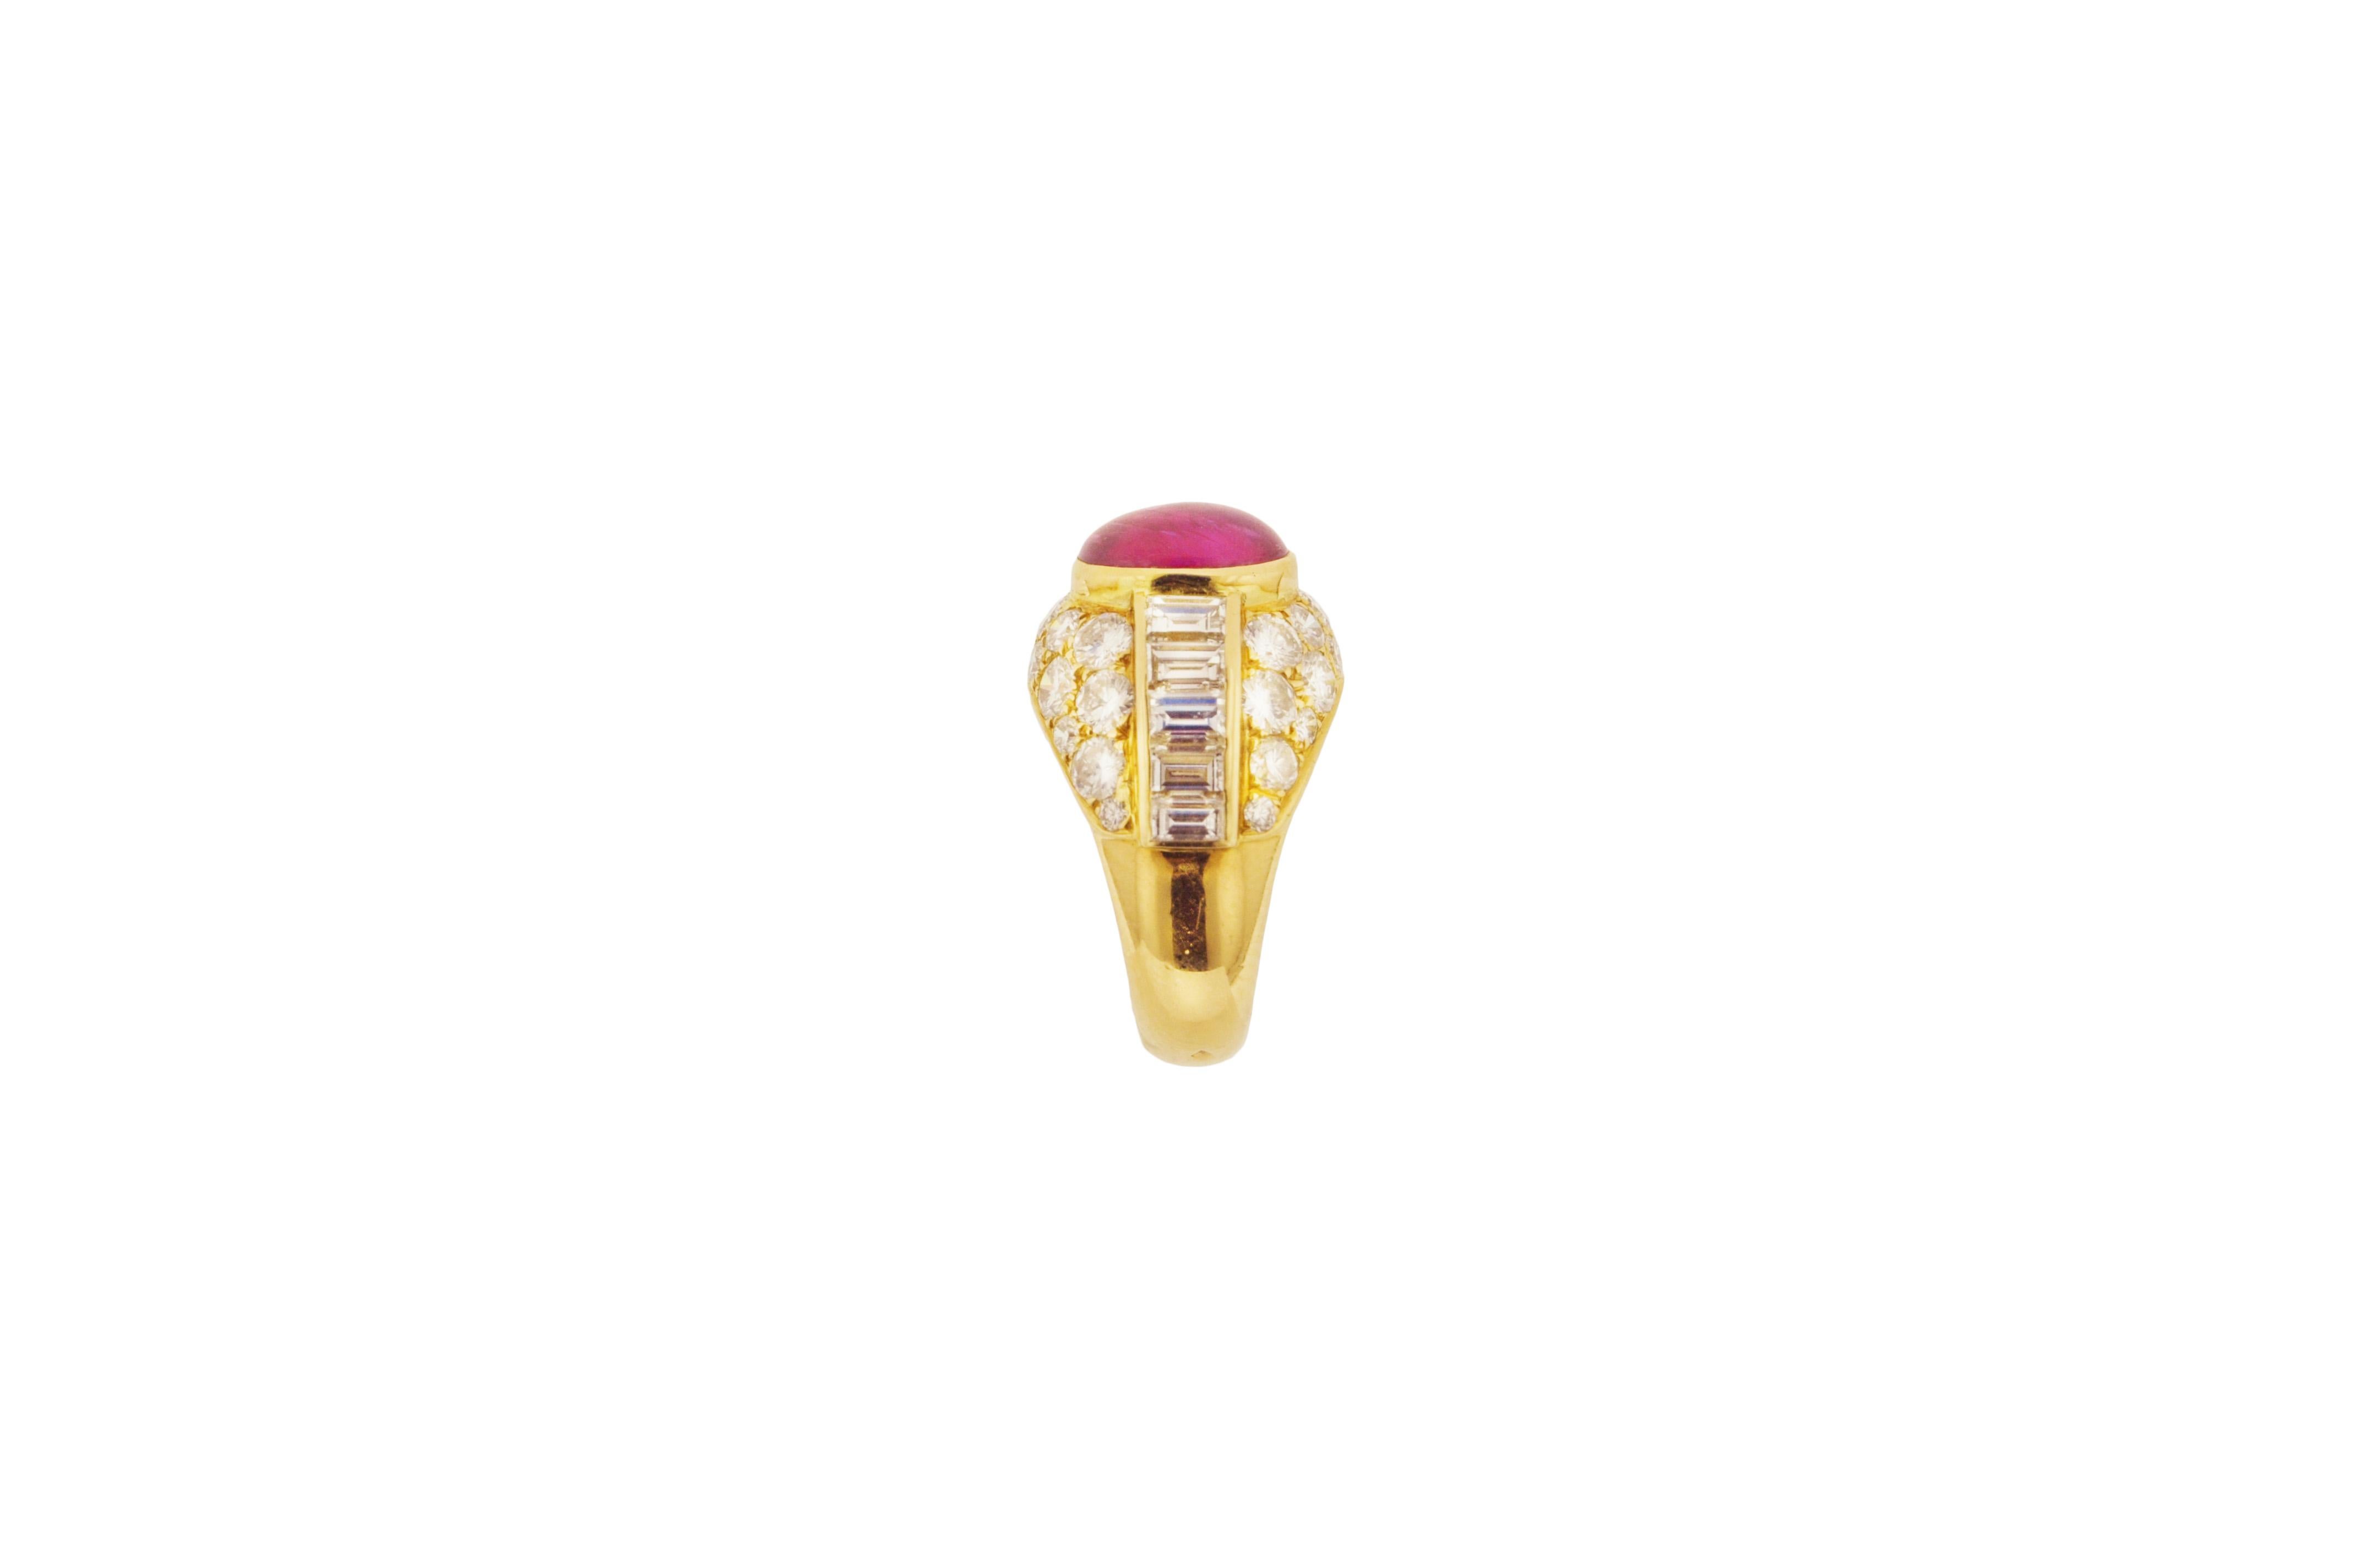 18K yellow gold estate French cocktail ring featuring an approximately 3.65 carat cabochon ruby and 44 diamonds weighing approximately 3.25 carats.

Diamonds:
34 round diamonds approx. 1.90-2.00 carats
10 baguette diamonds approx. 1.30 carats

Ring